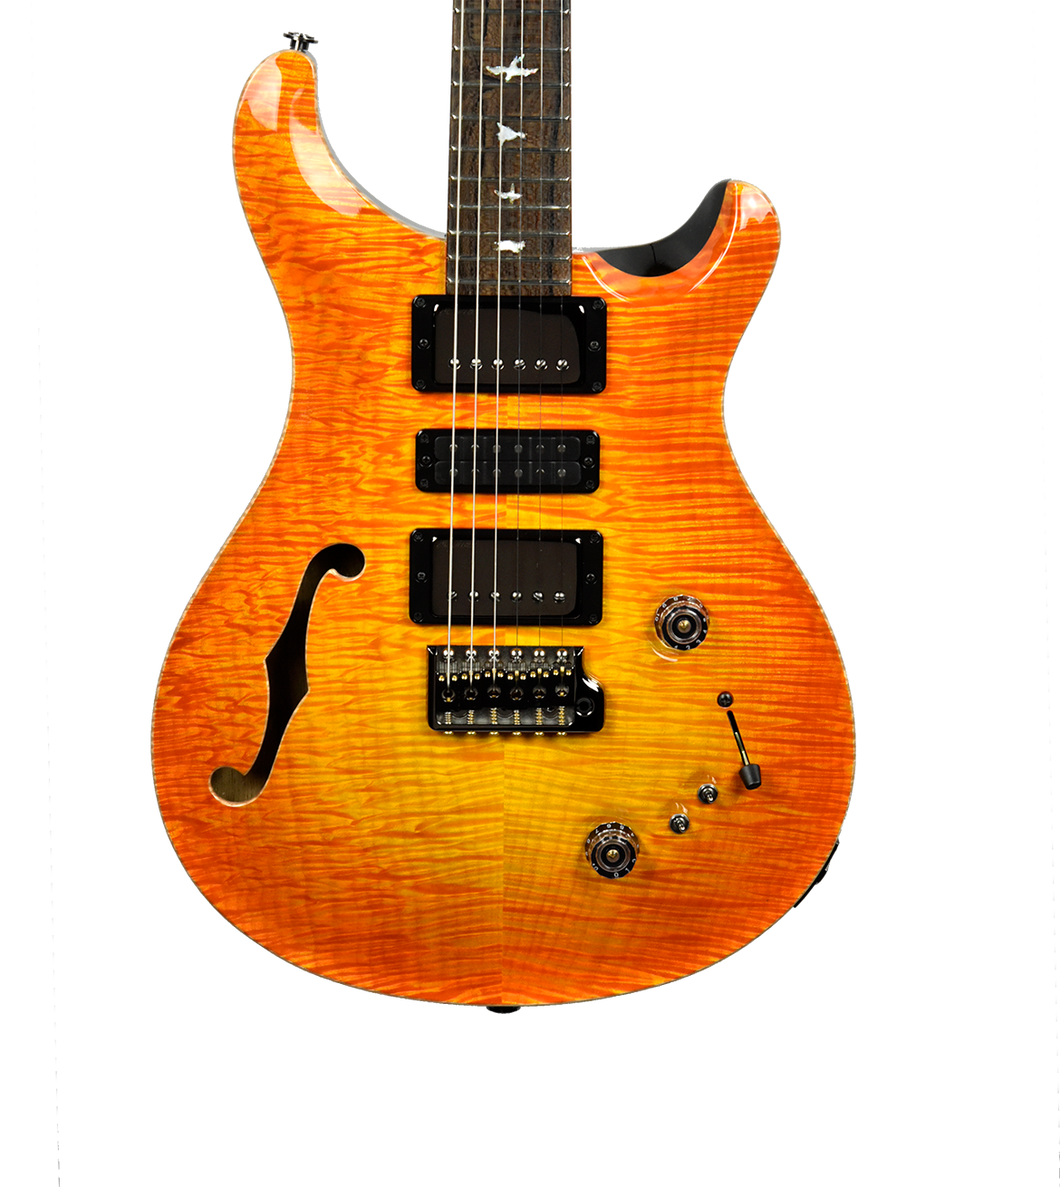 PRS Private Stock Special Semi-Hollow Limited Edition in Citrus Glow 22345058